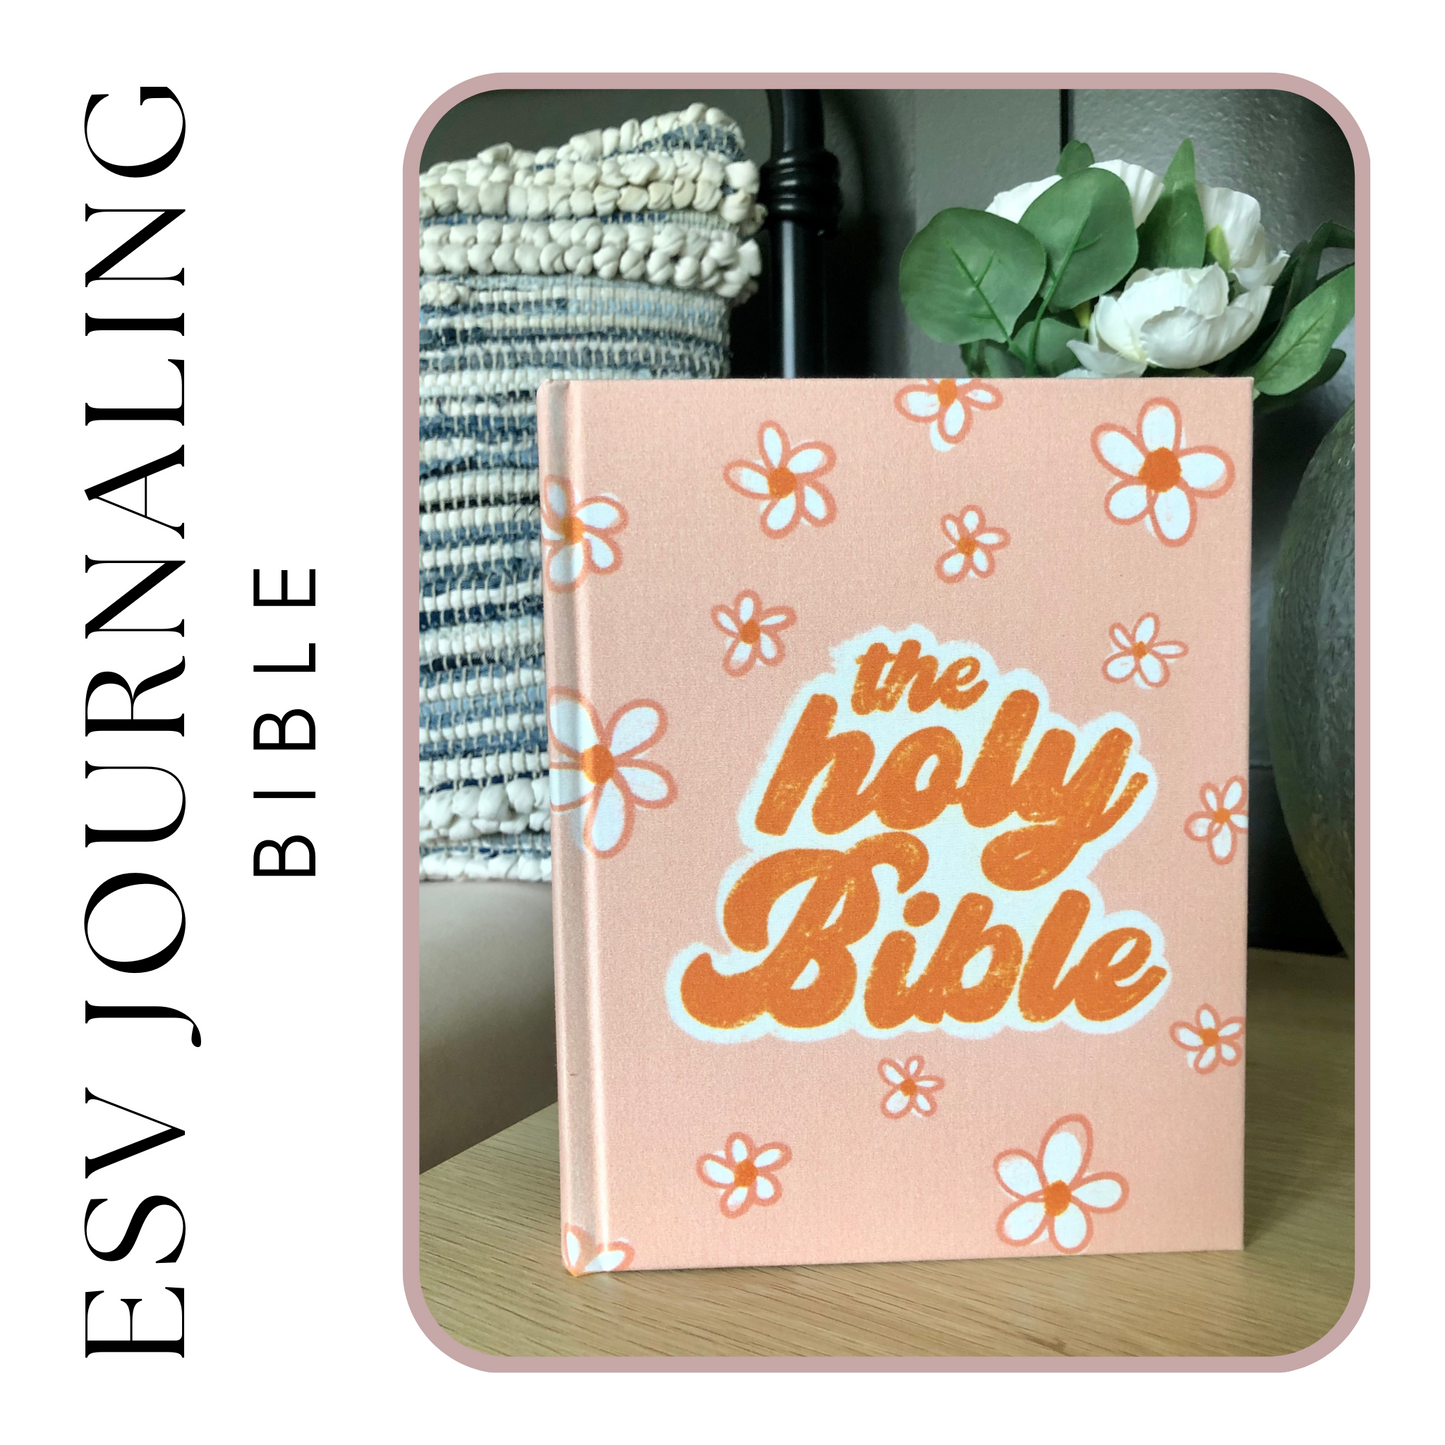 Adorable ESV Journaling Bible for Faithful Reflection